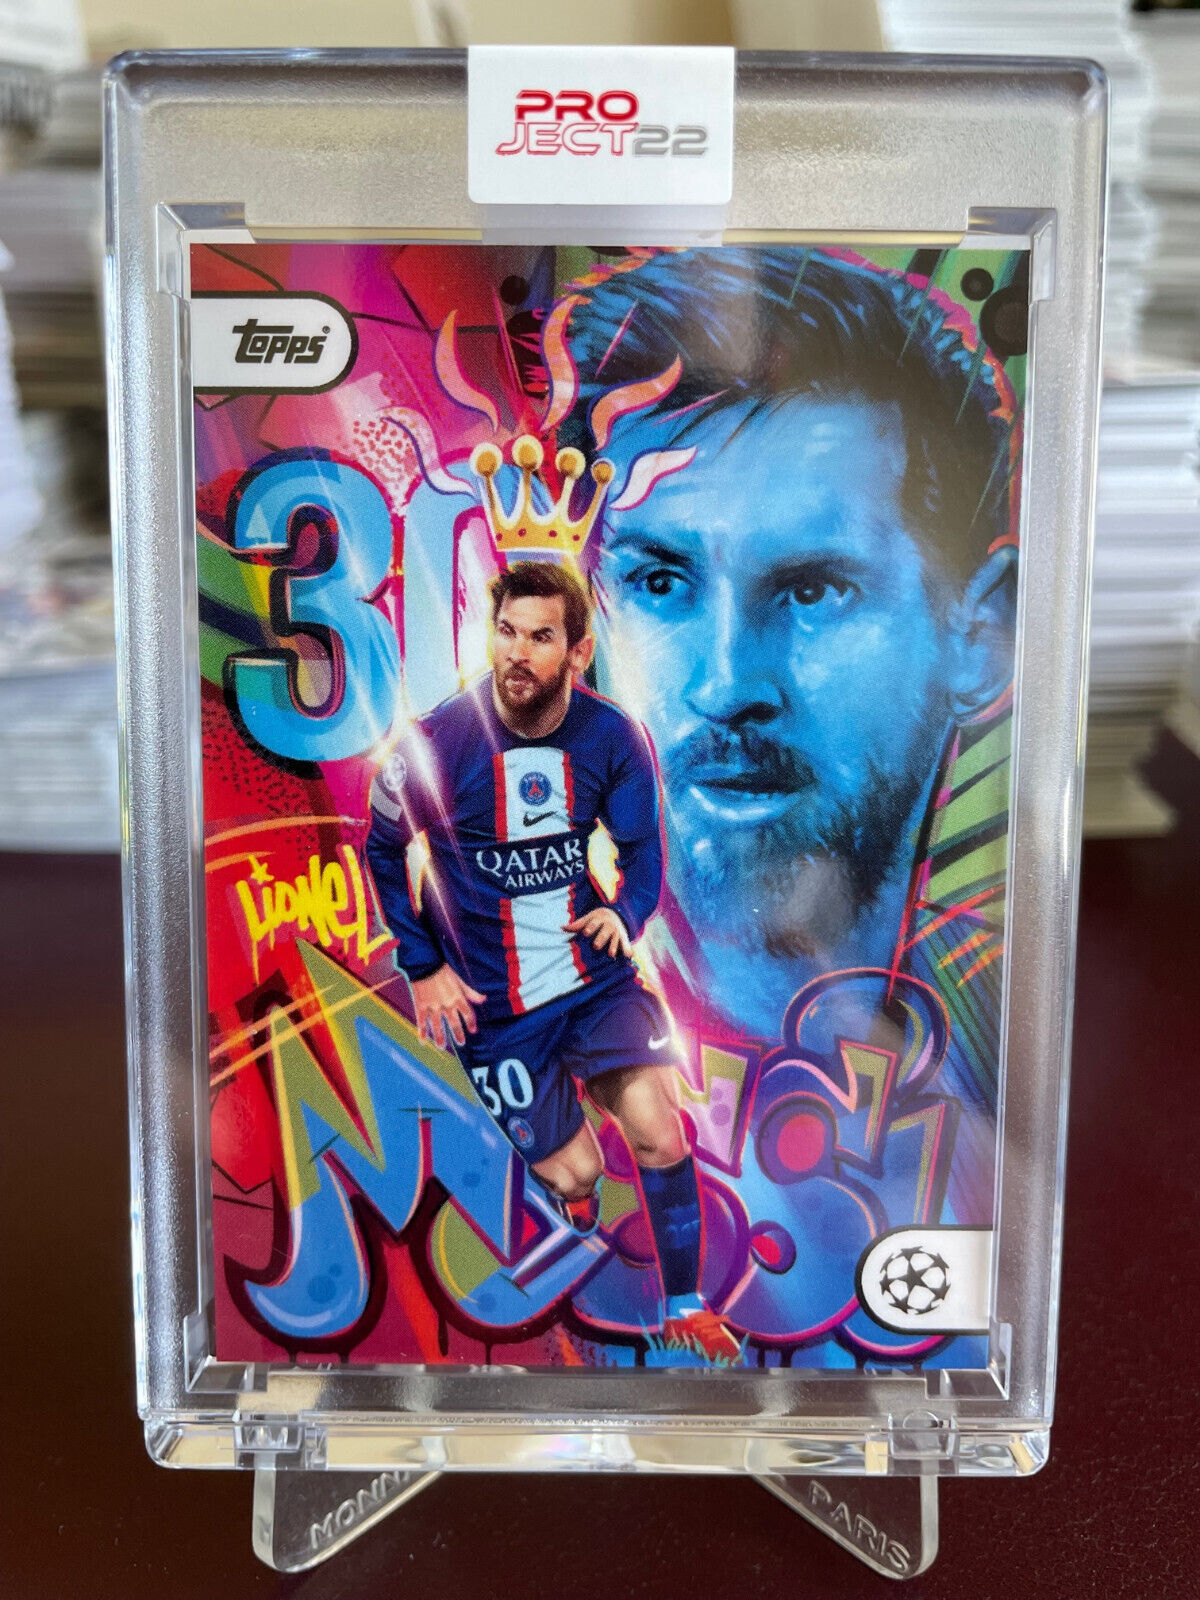 TOPPS PROJECT 22 LIONEL MESSI CARD PSG by ORLANDO AROCENA UEFA CL